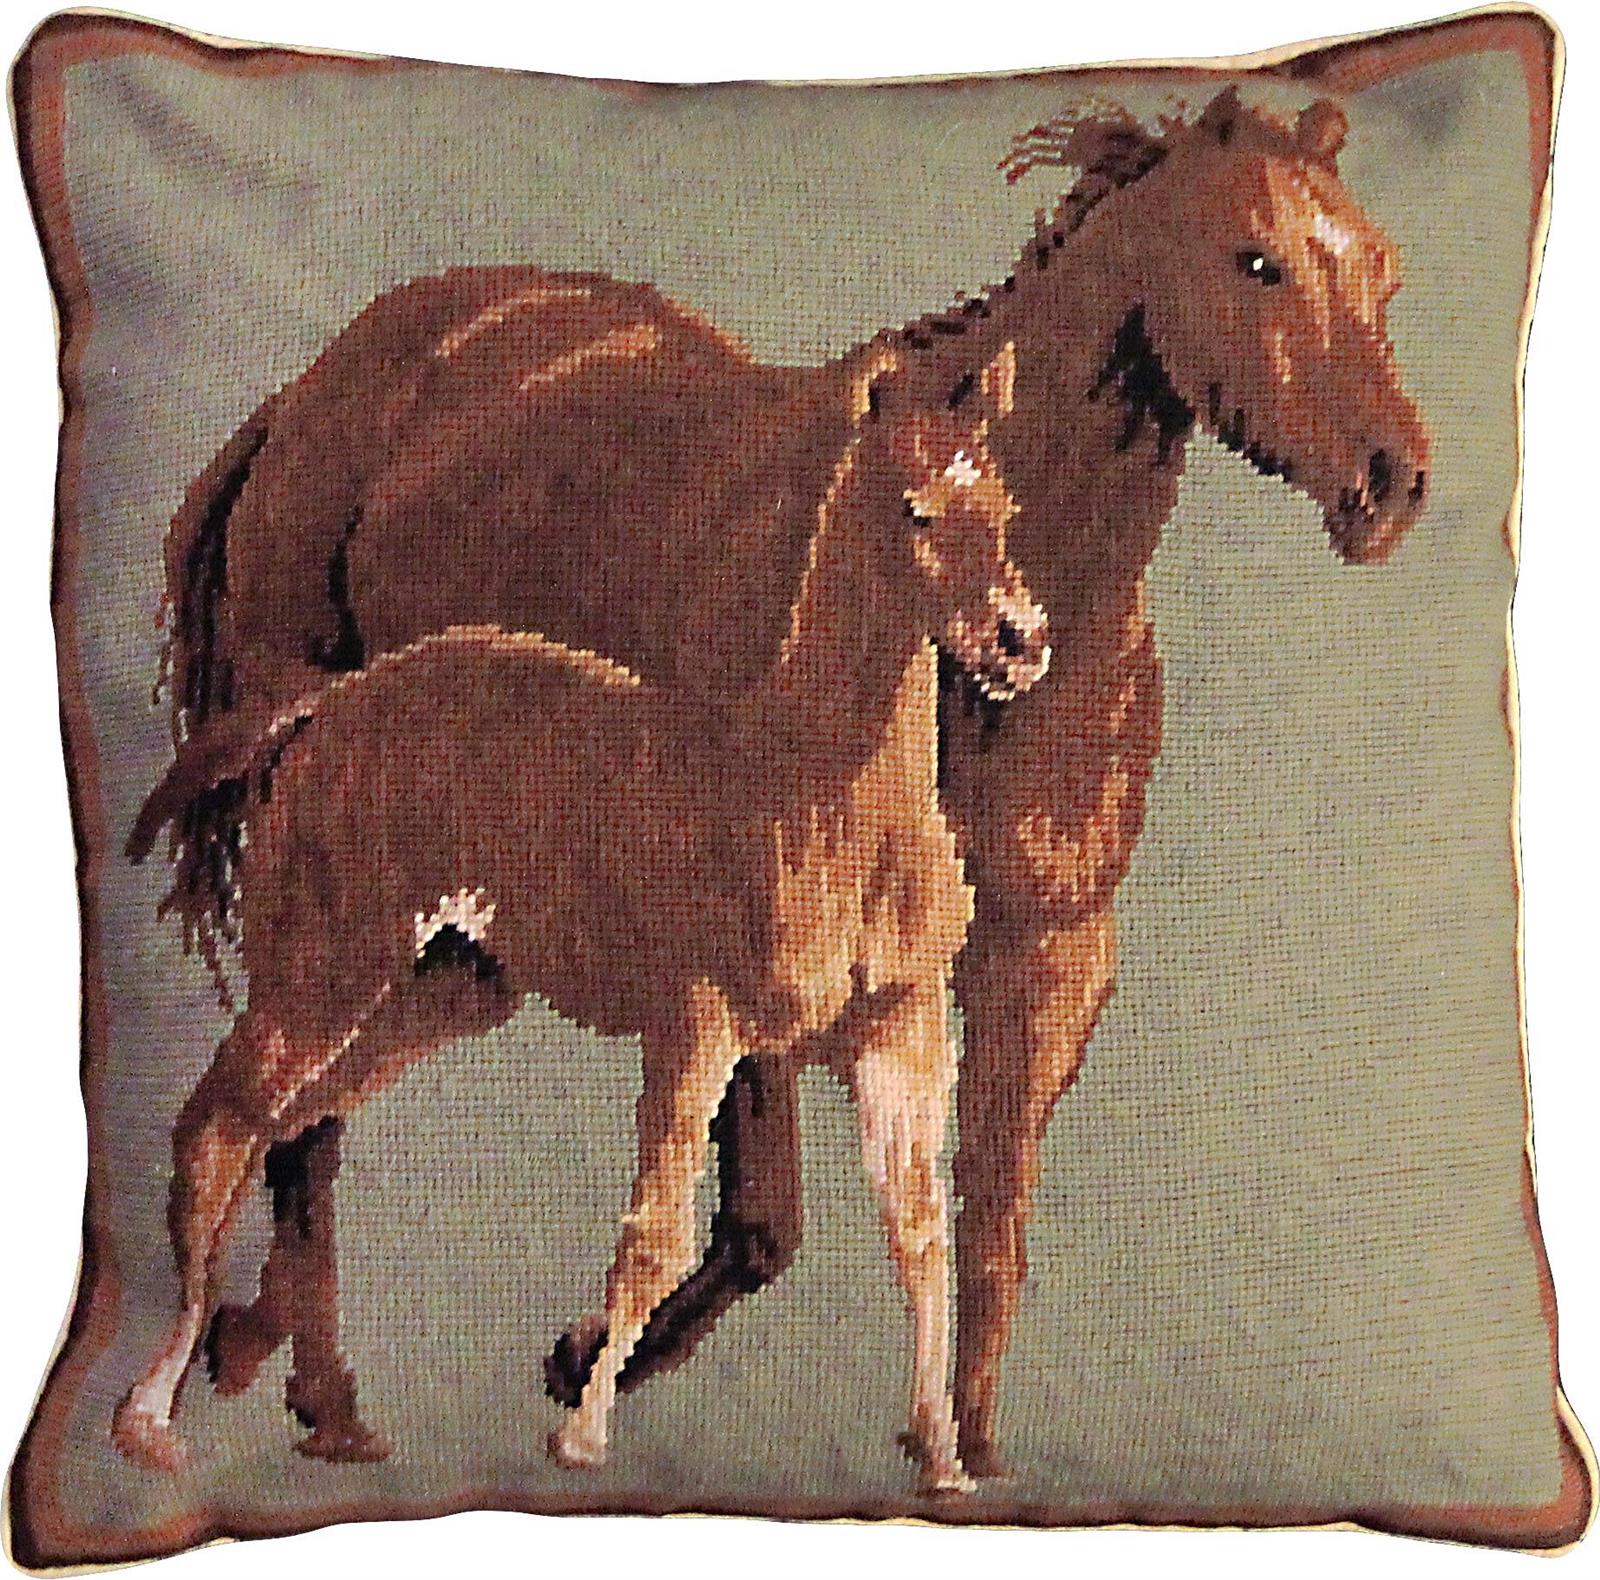 Throw Pillow Needlepoint Quarter Horses Horse Right 20x20 Sage Green Wool-Image 1